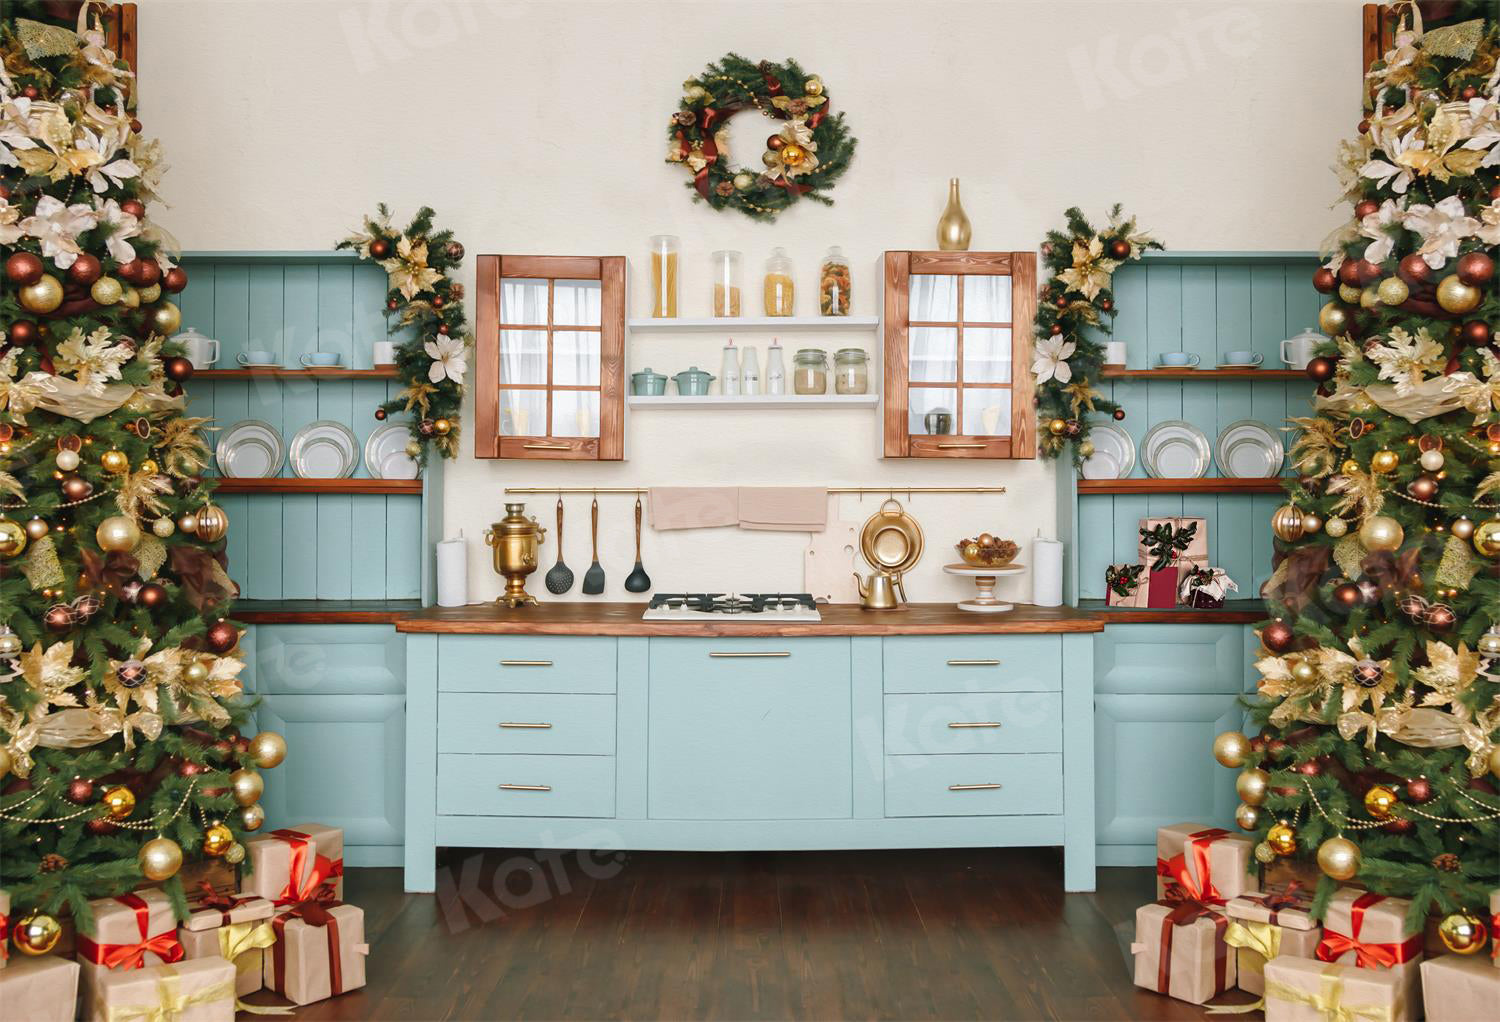 Kate Christmas Kitchen Room Backdrop for Photography